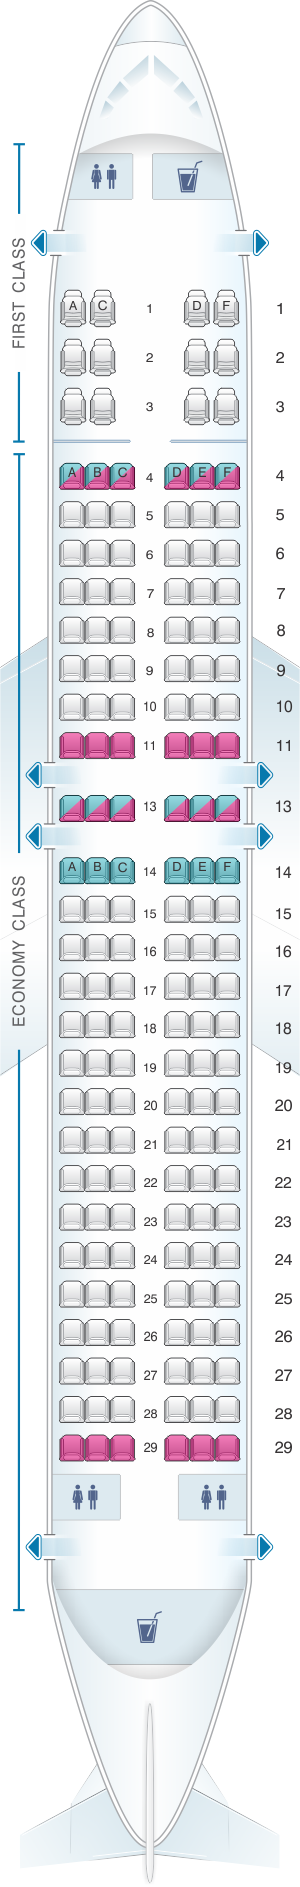 sun country air seat assignments